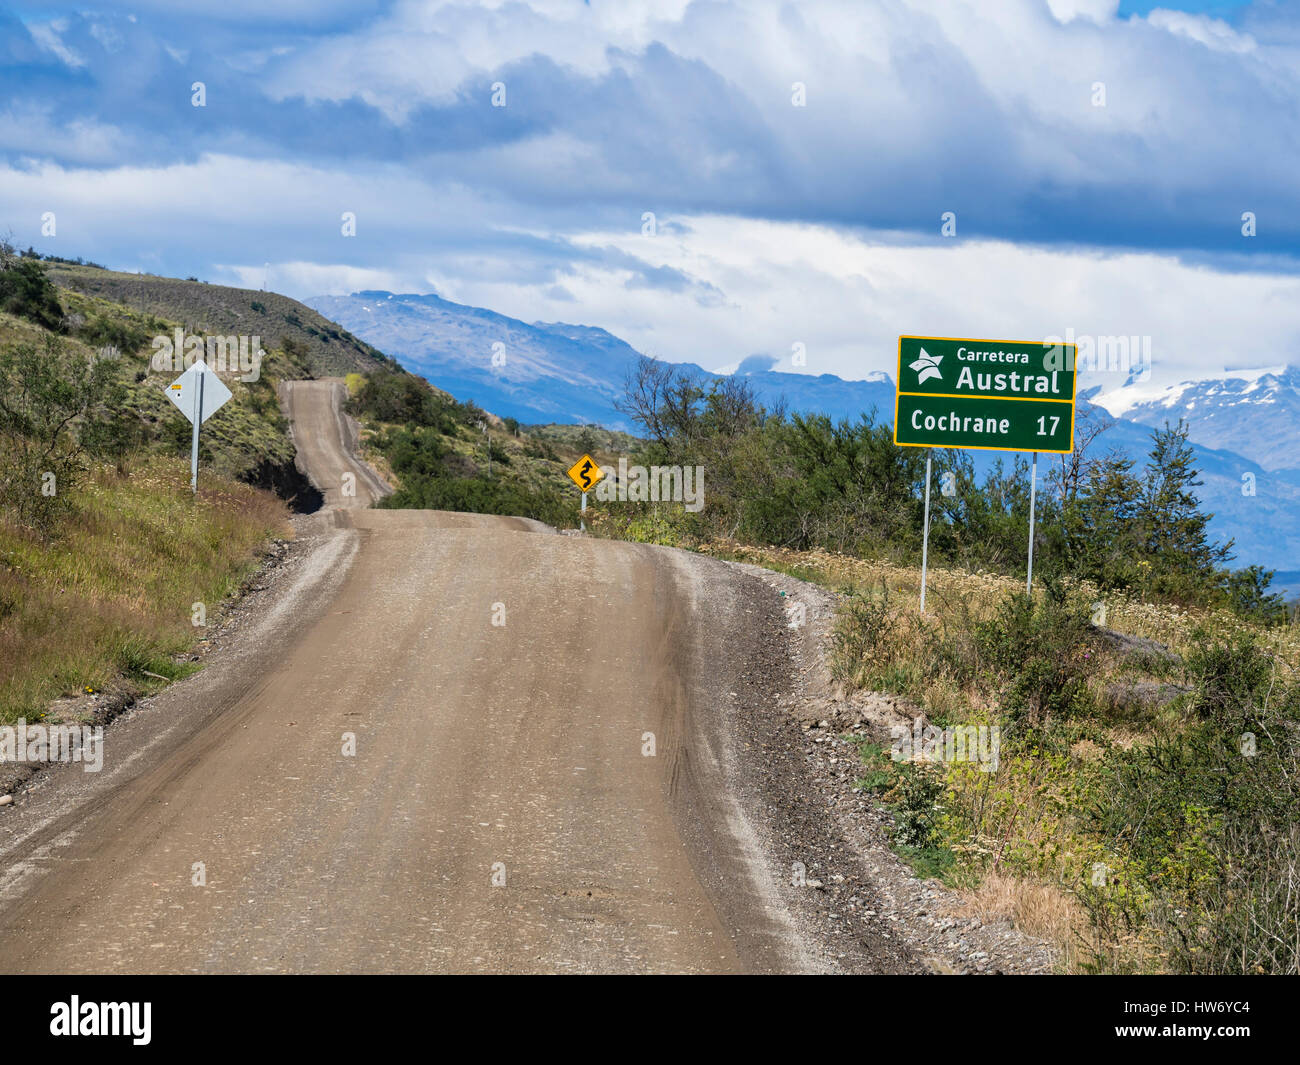 Carretera Austral north of Cochrane, gravel surface, signpost showing distance to Cochrane, mountain range in background, Patagonia, Chile Stock Photo